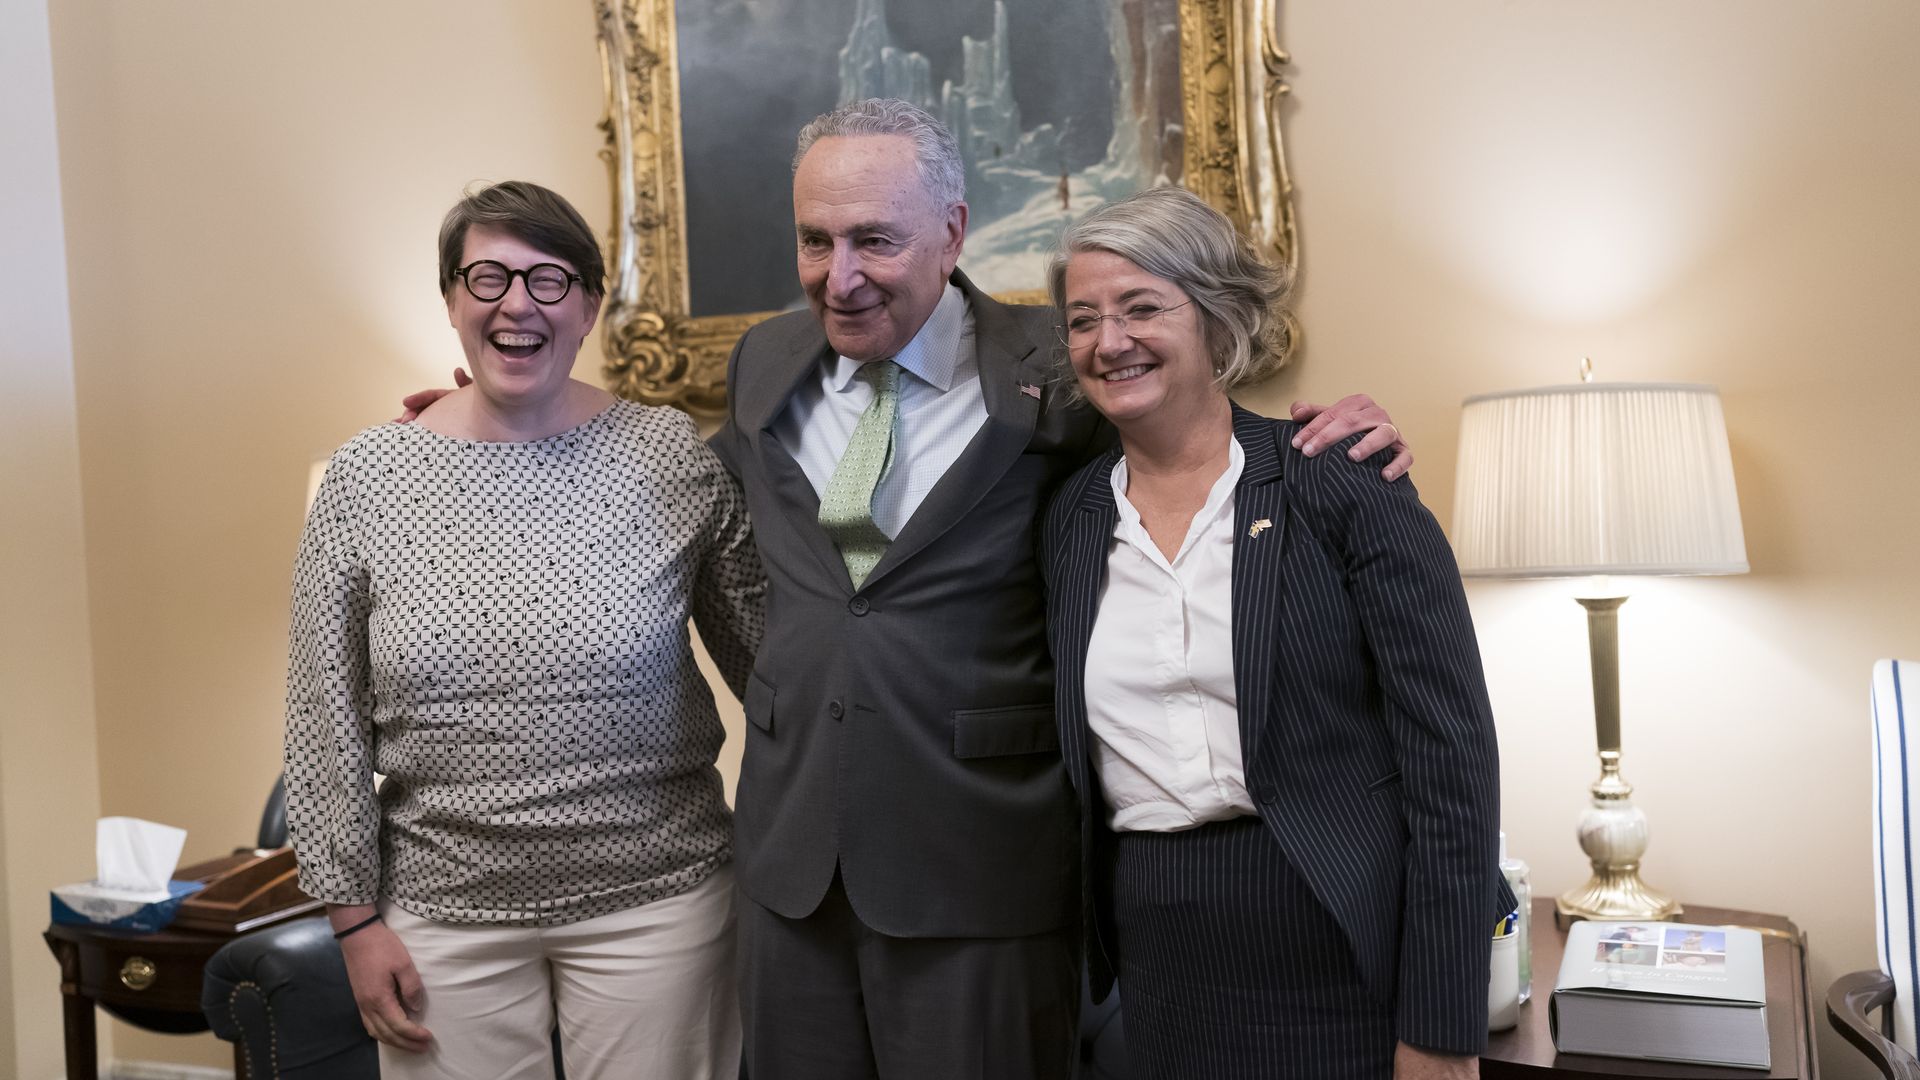 Schumer with officials from Sweden and Finland